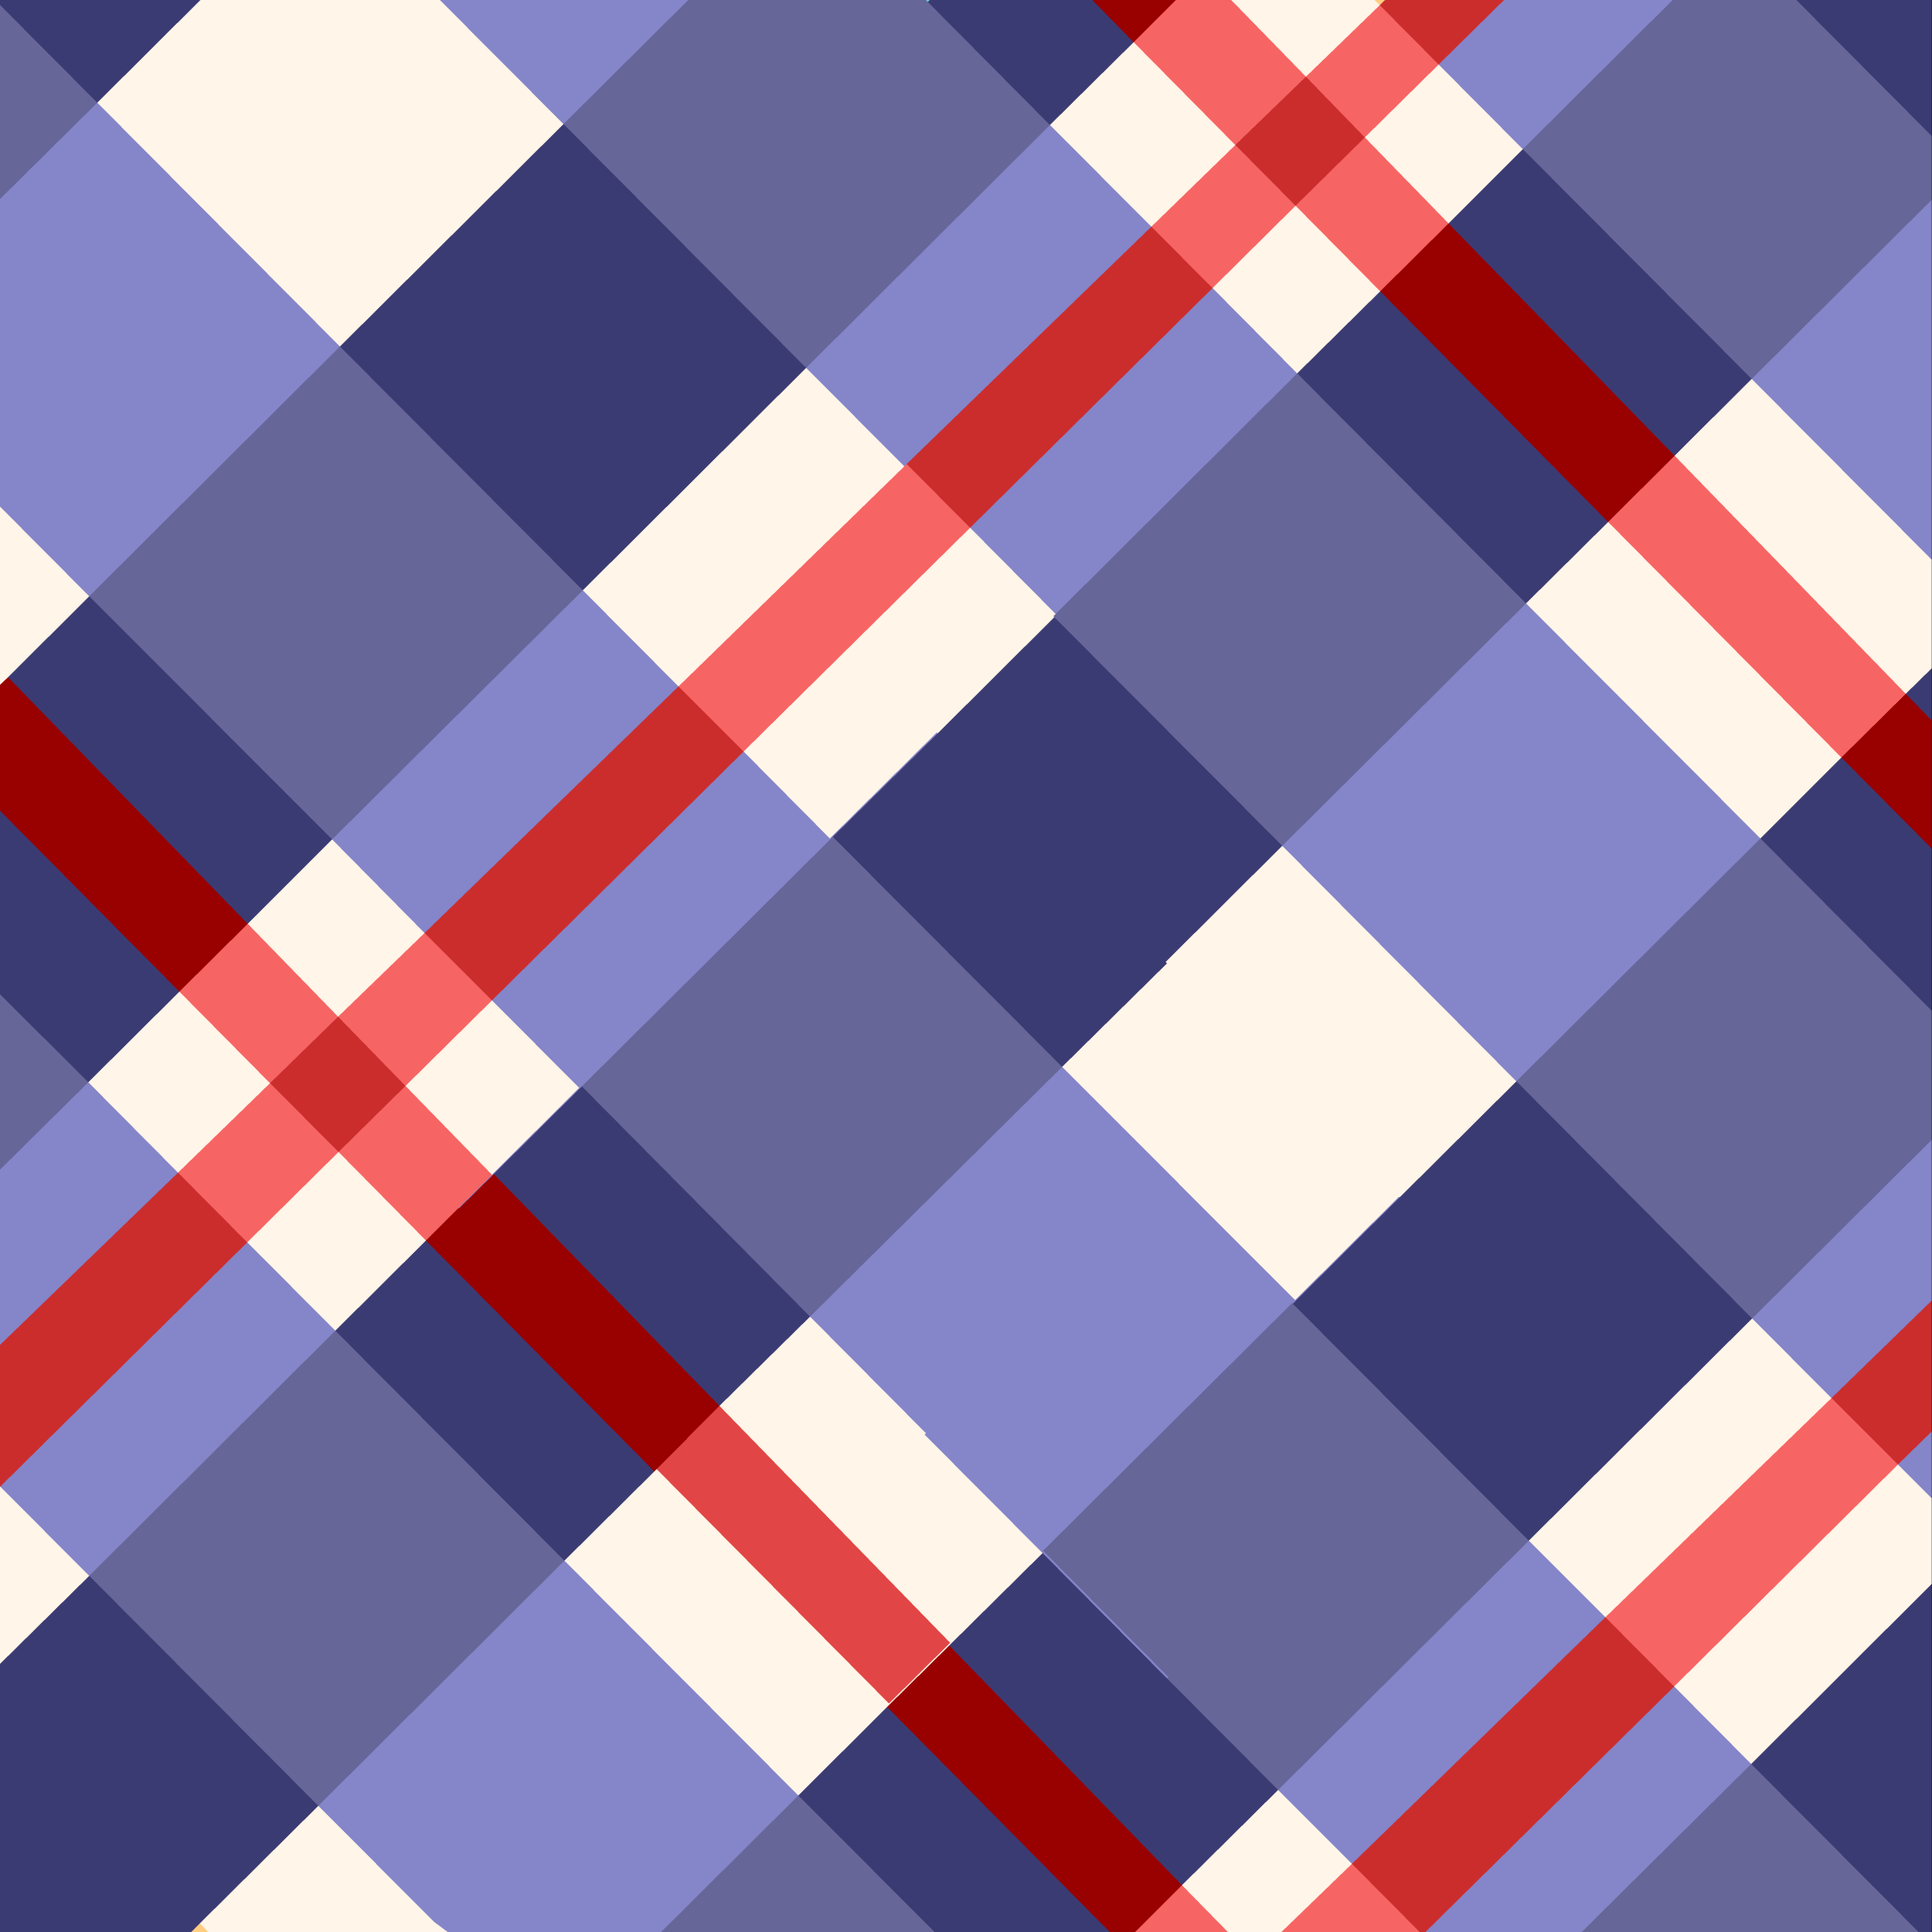 Red and Purple Plaid Background   Club Penguin Wiki   The free